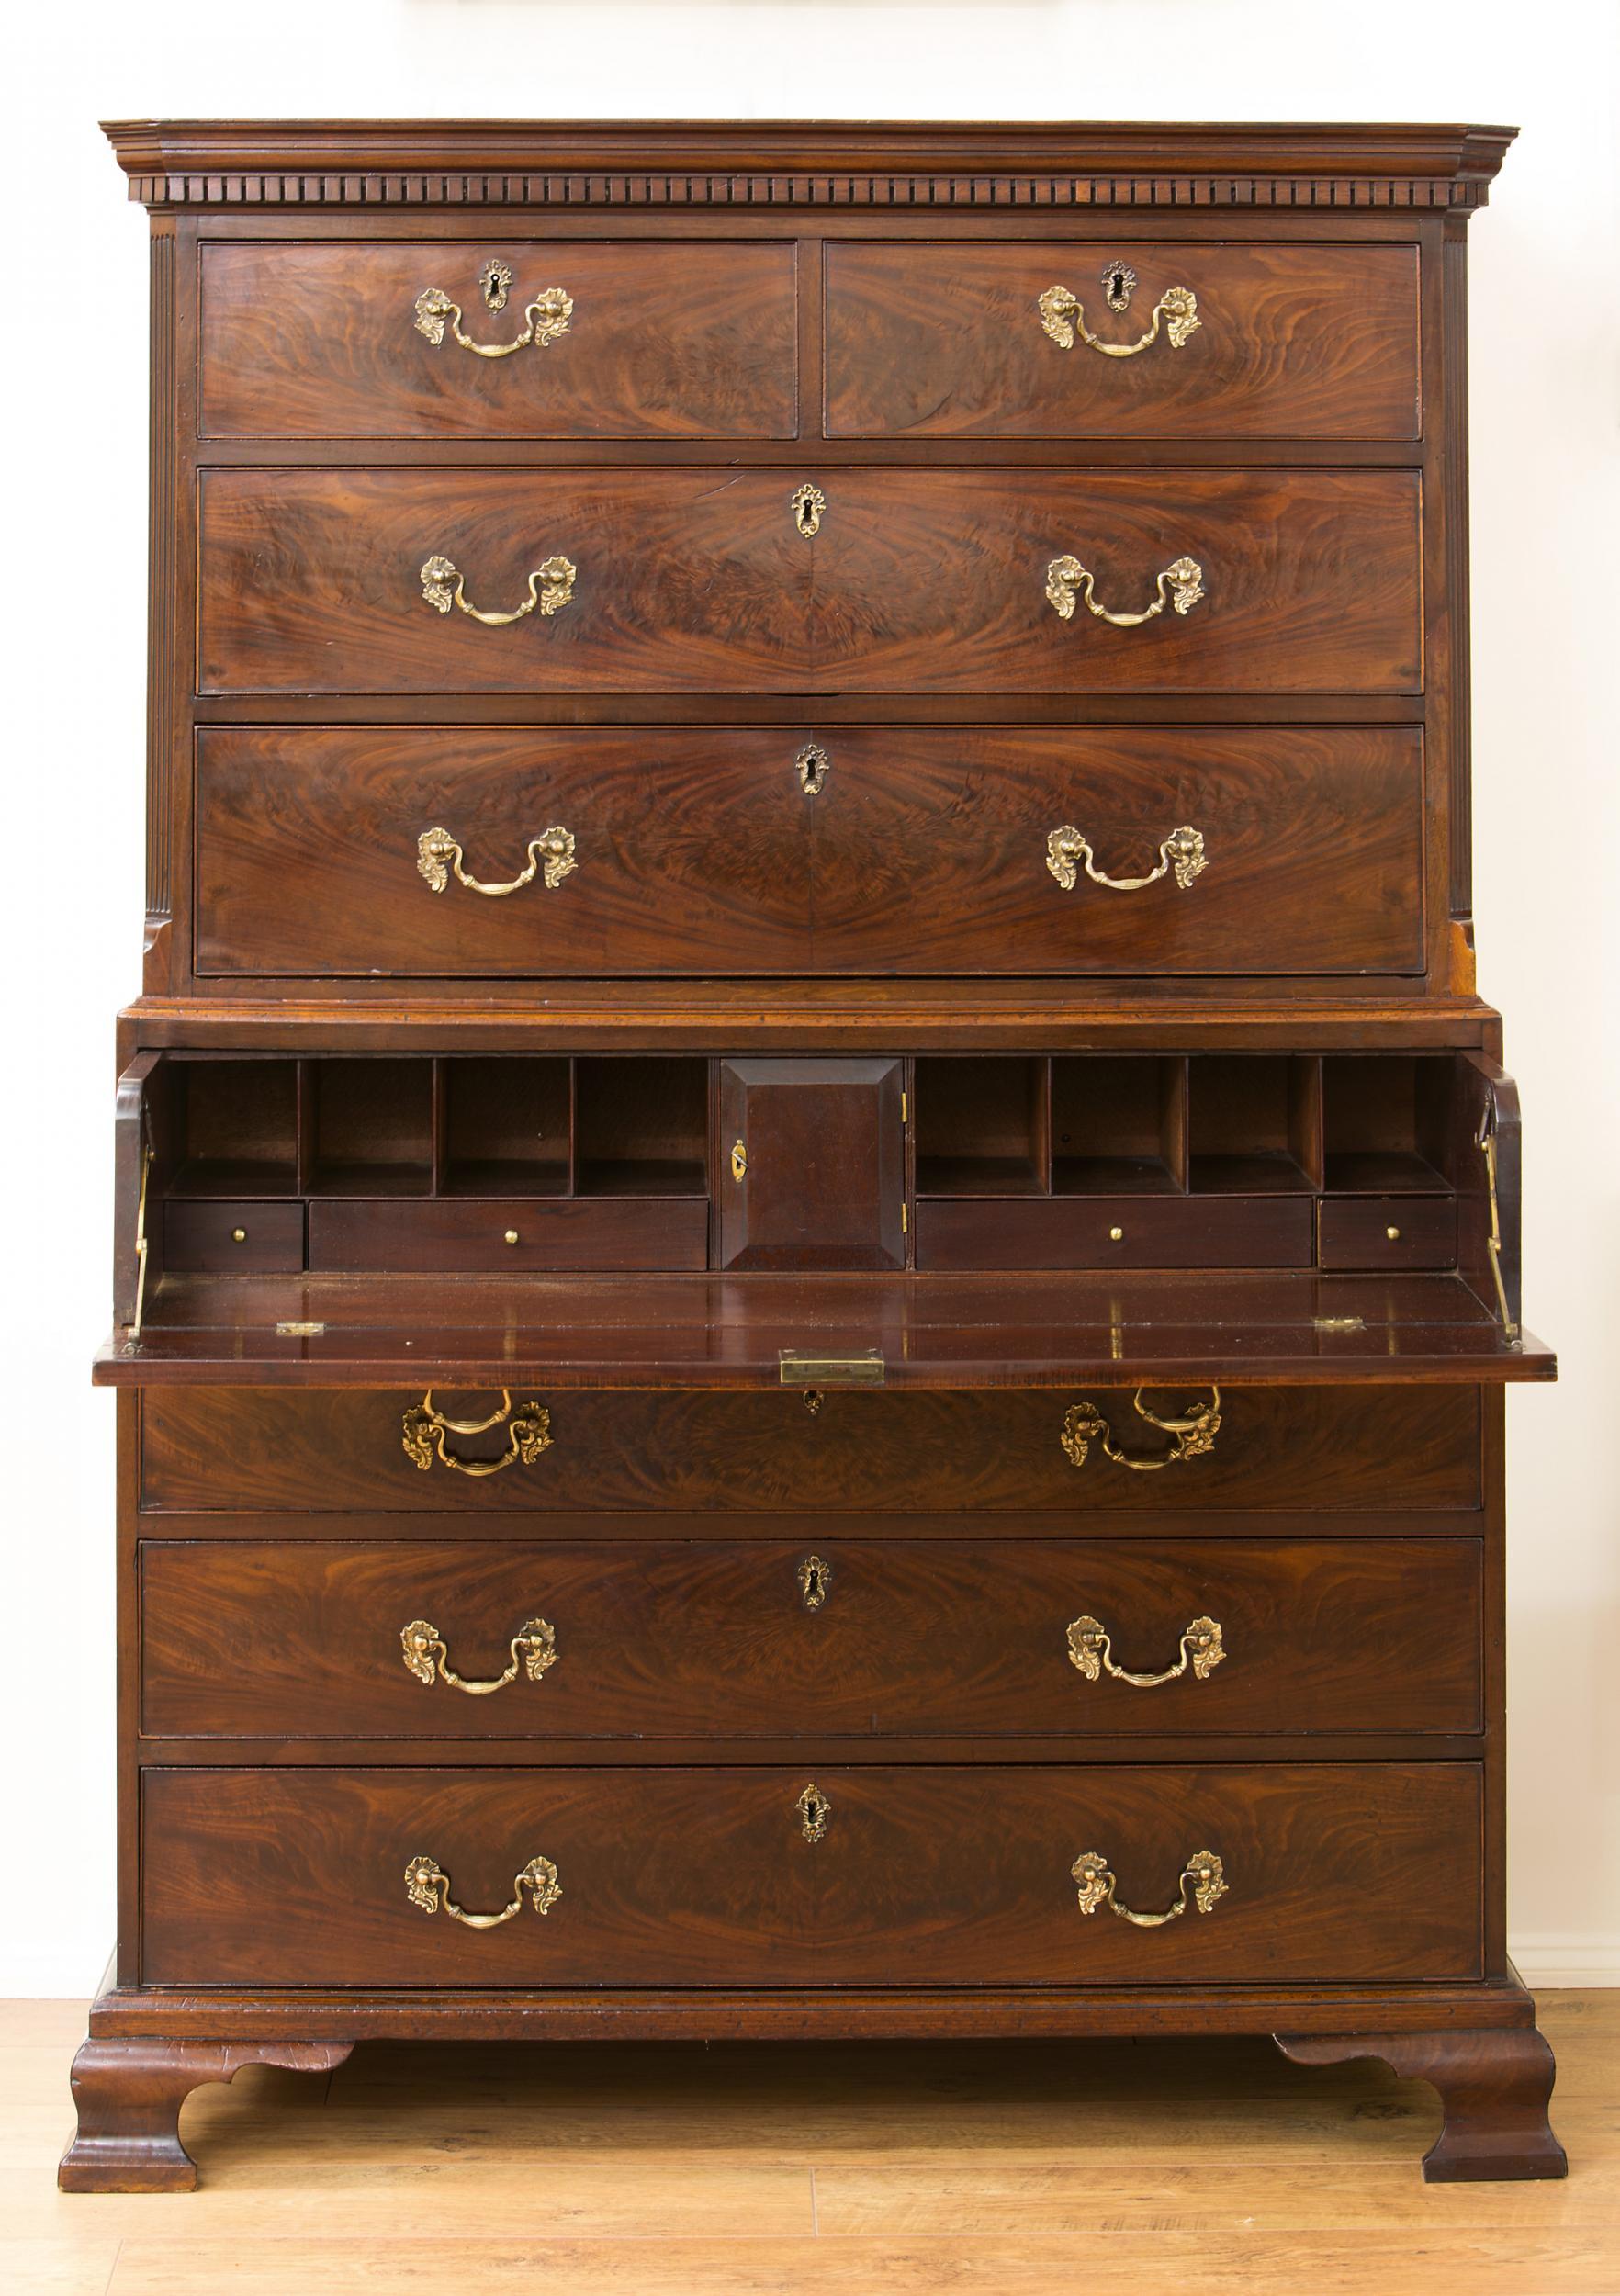 Georgian flame mahogany Tallboy with canted, fluted corners, secrétaire break front with beautifully fitted interior, standing on bracket feet with brass handles, c.1760.